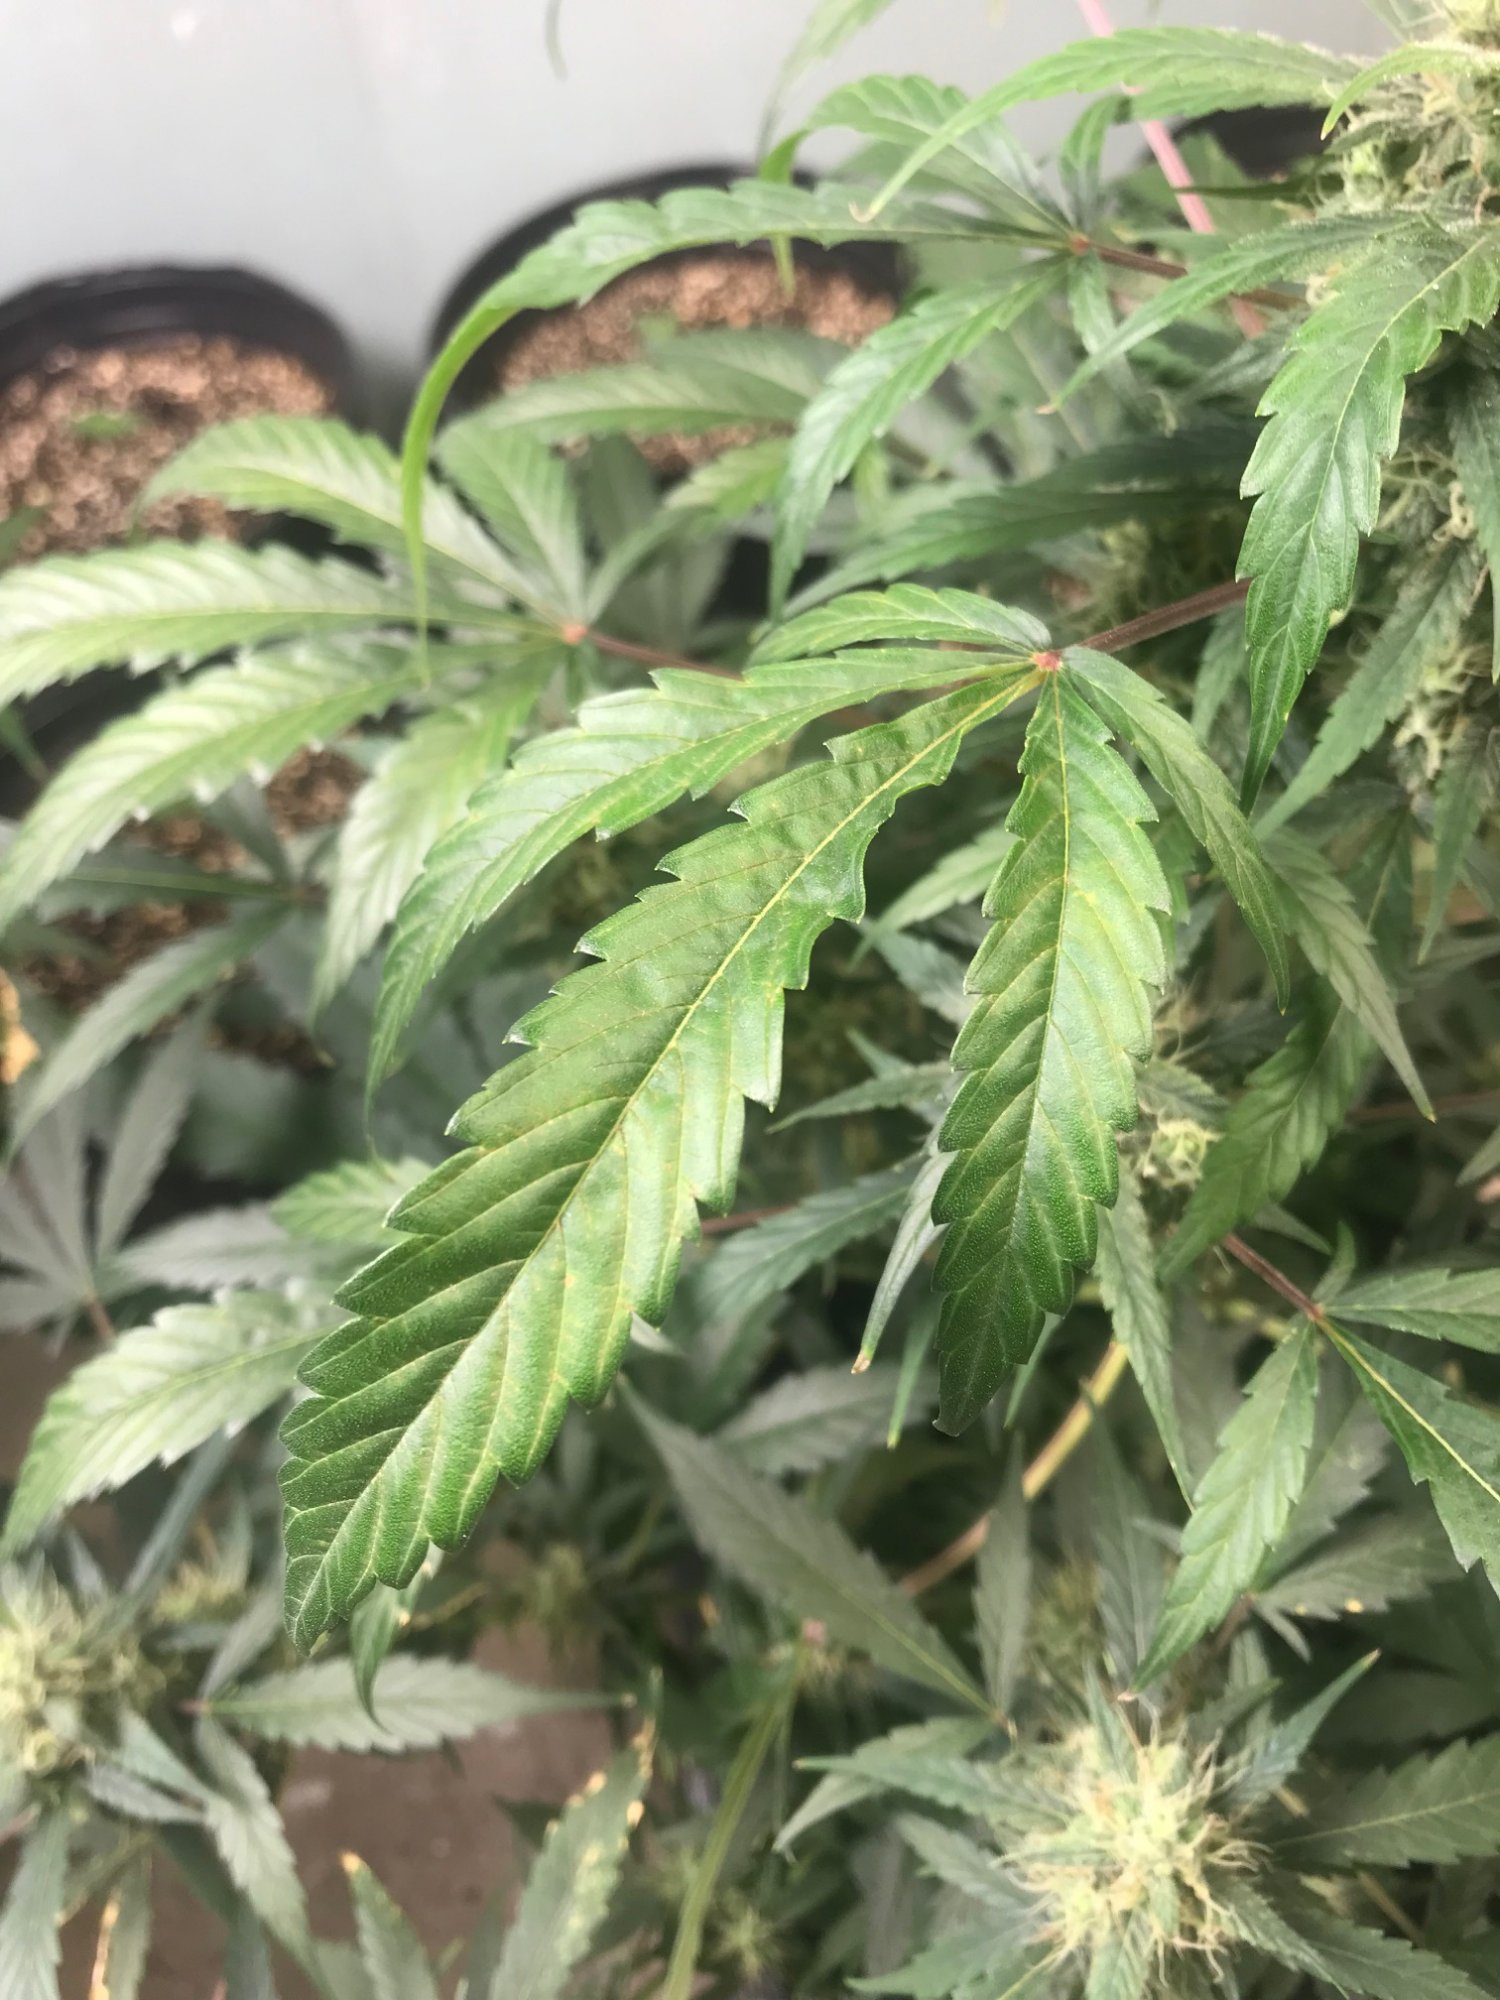 Plant leaves a bit droopy as well as showing other signs of not doing the greatest please help